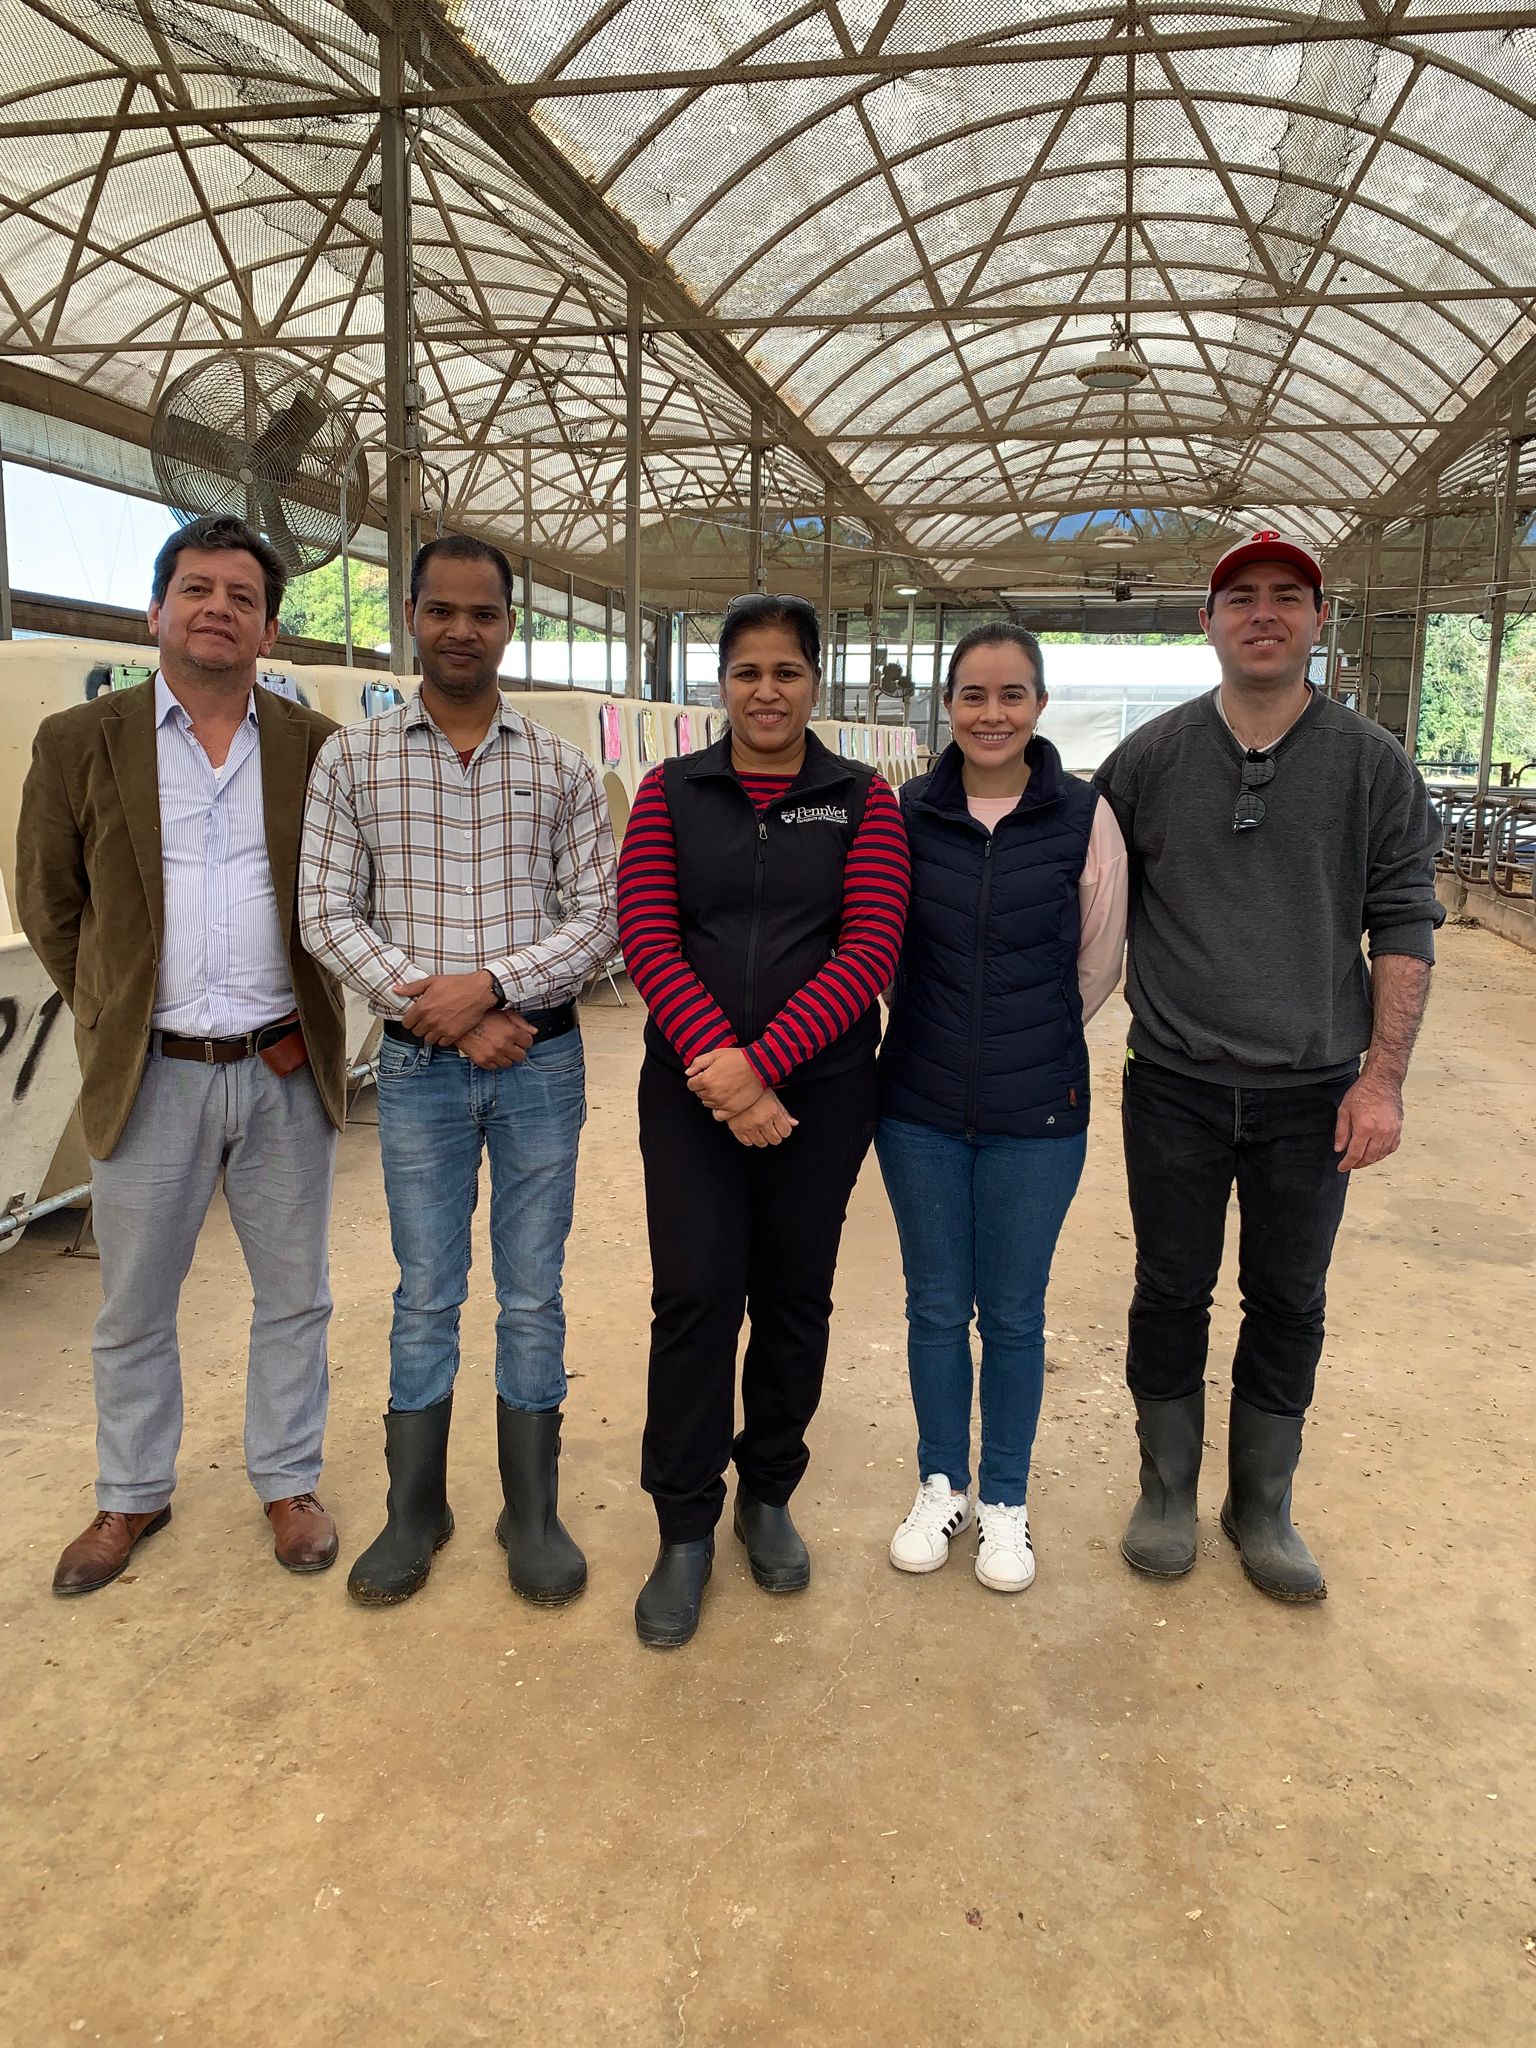 Student with his research team at dairy facility.